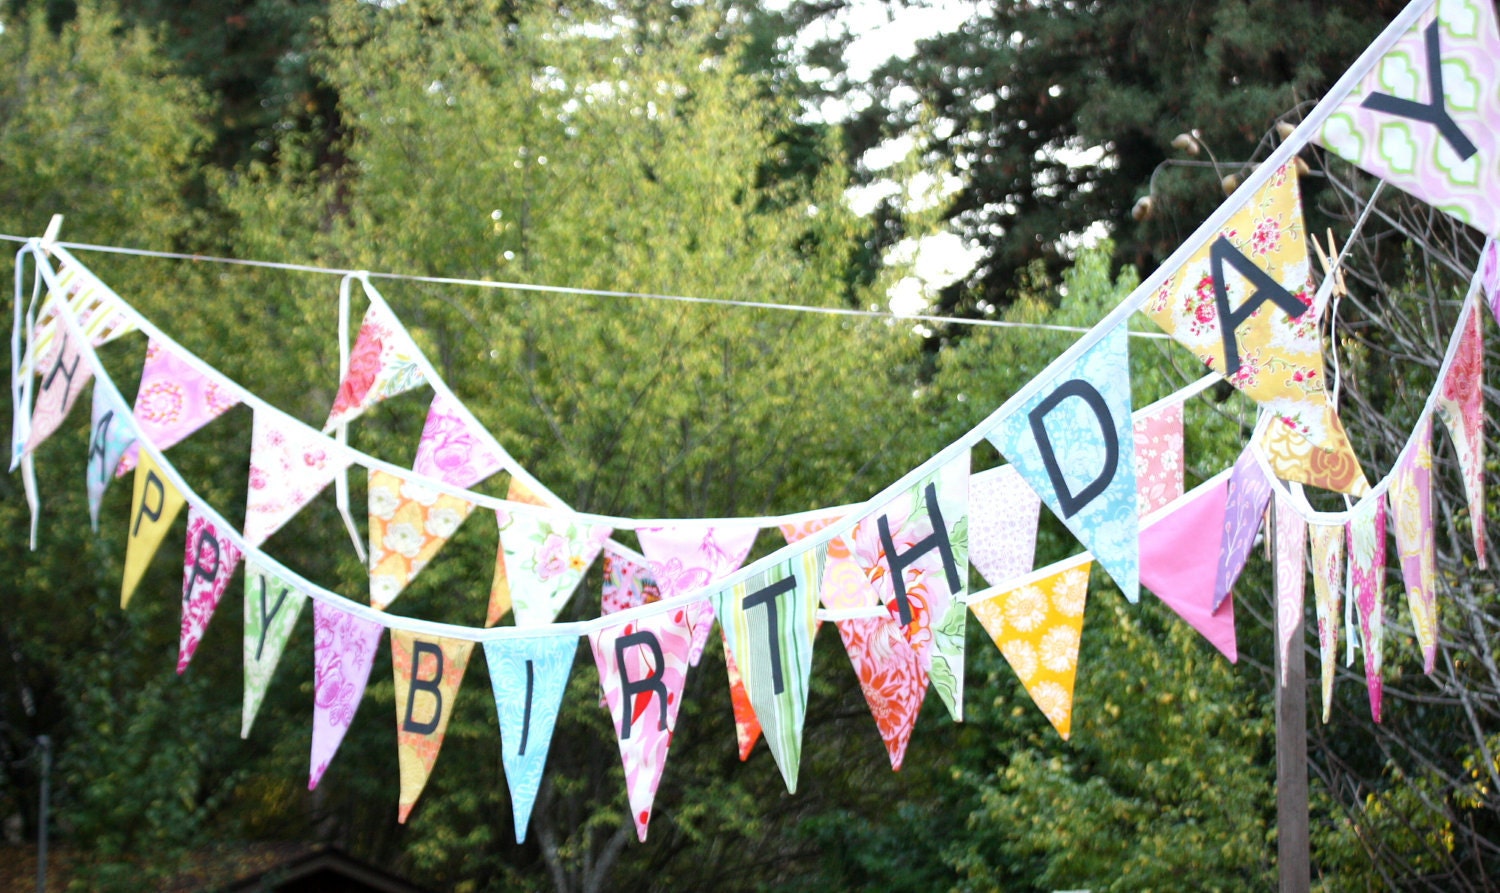 CUSTOM Happy Birthday Banner Bunting Party Flags.  A Unique Party Decoration.  Reversible. Made To Order in Your Chosen Colors.